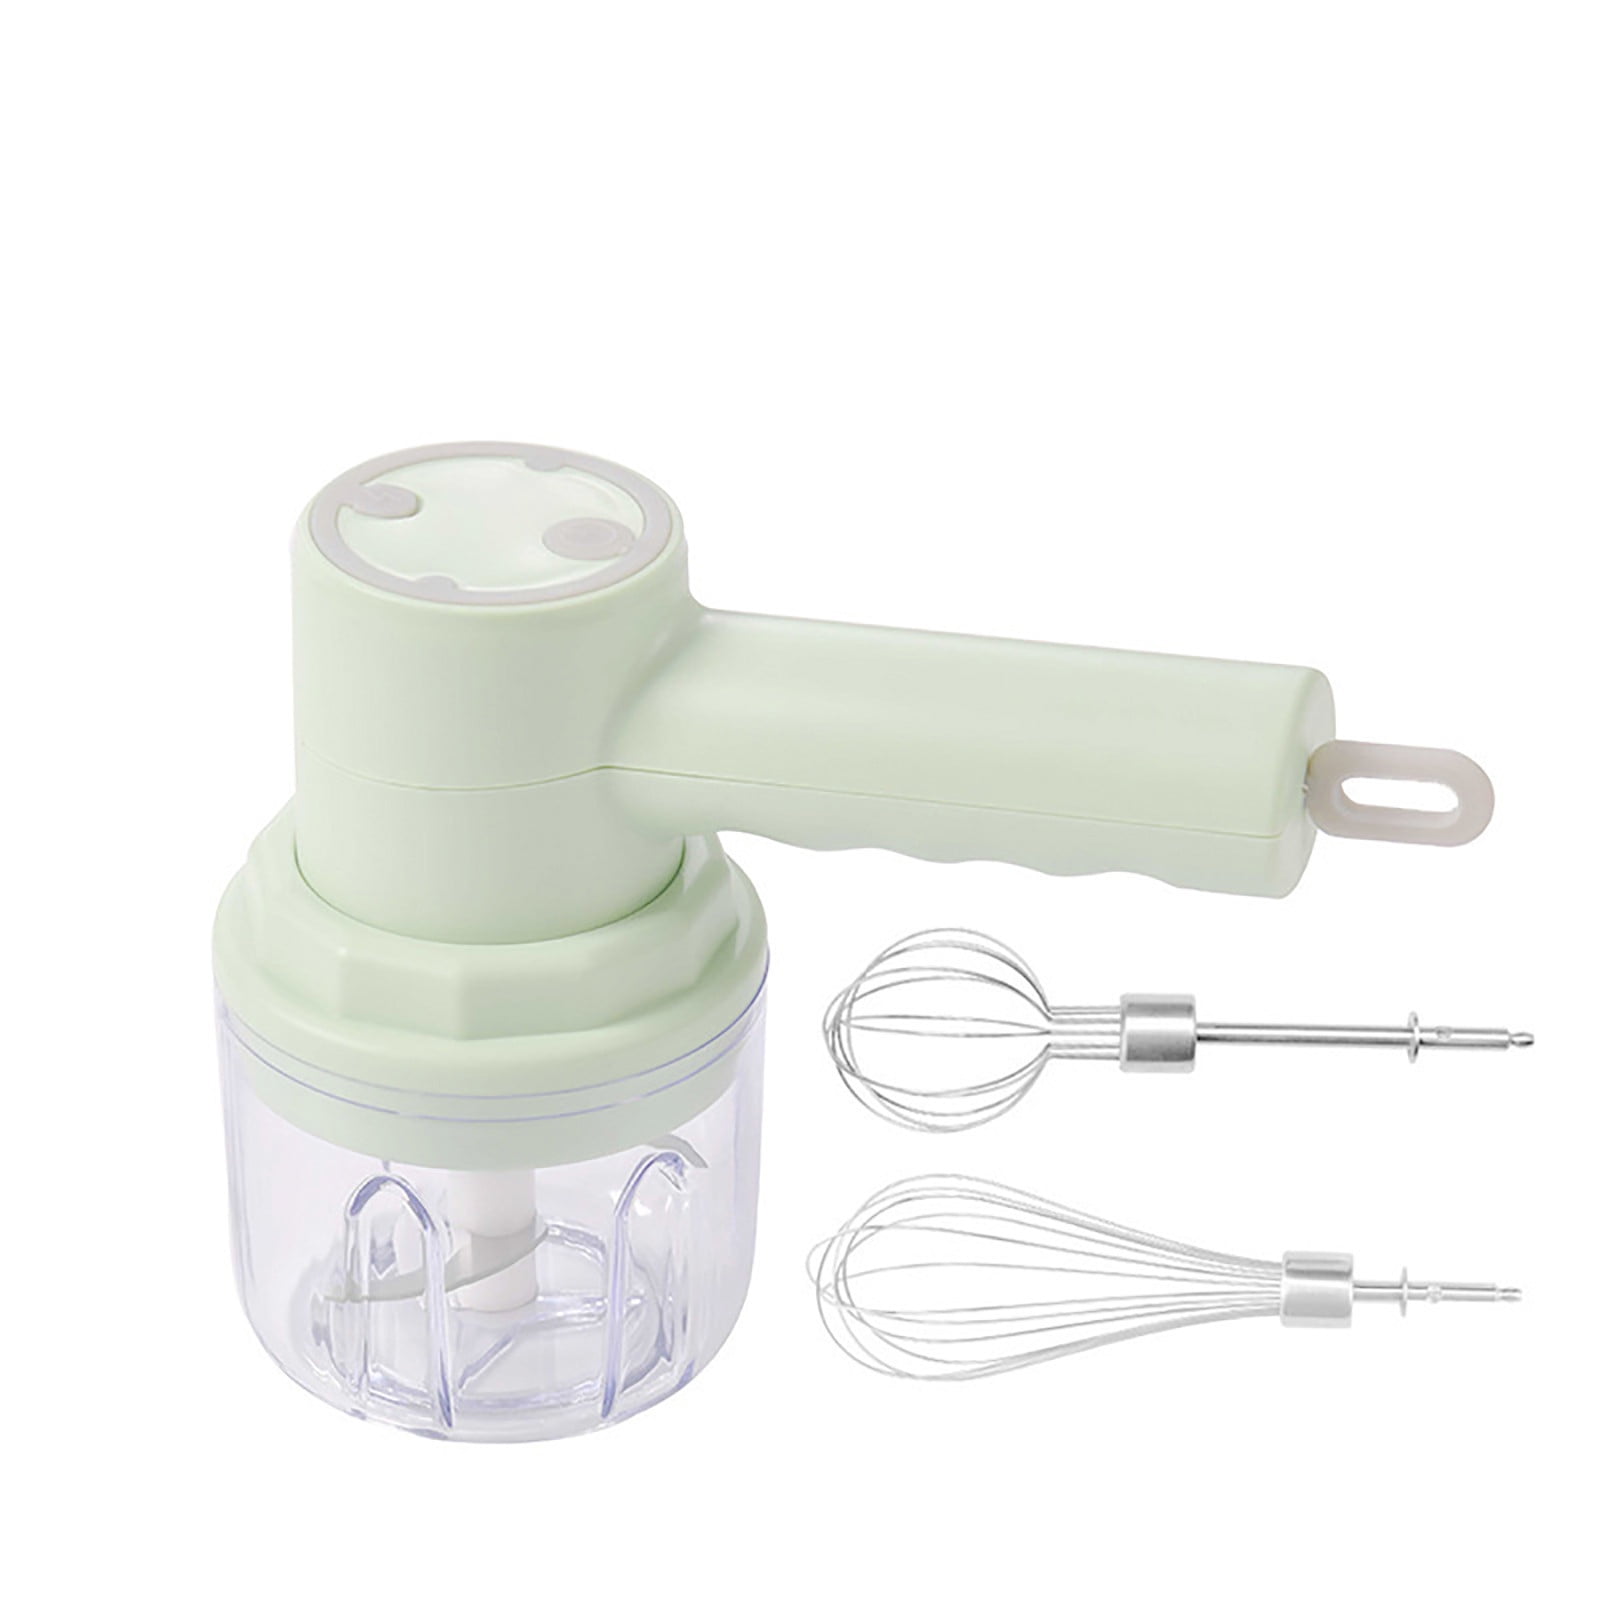 OAVQHLG3B 3 In 1 Food Chopper & Hand Mixer,Handheld Whisk Electric